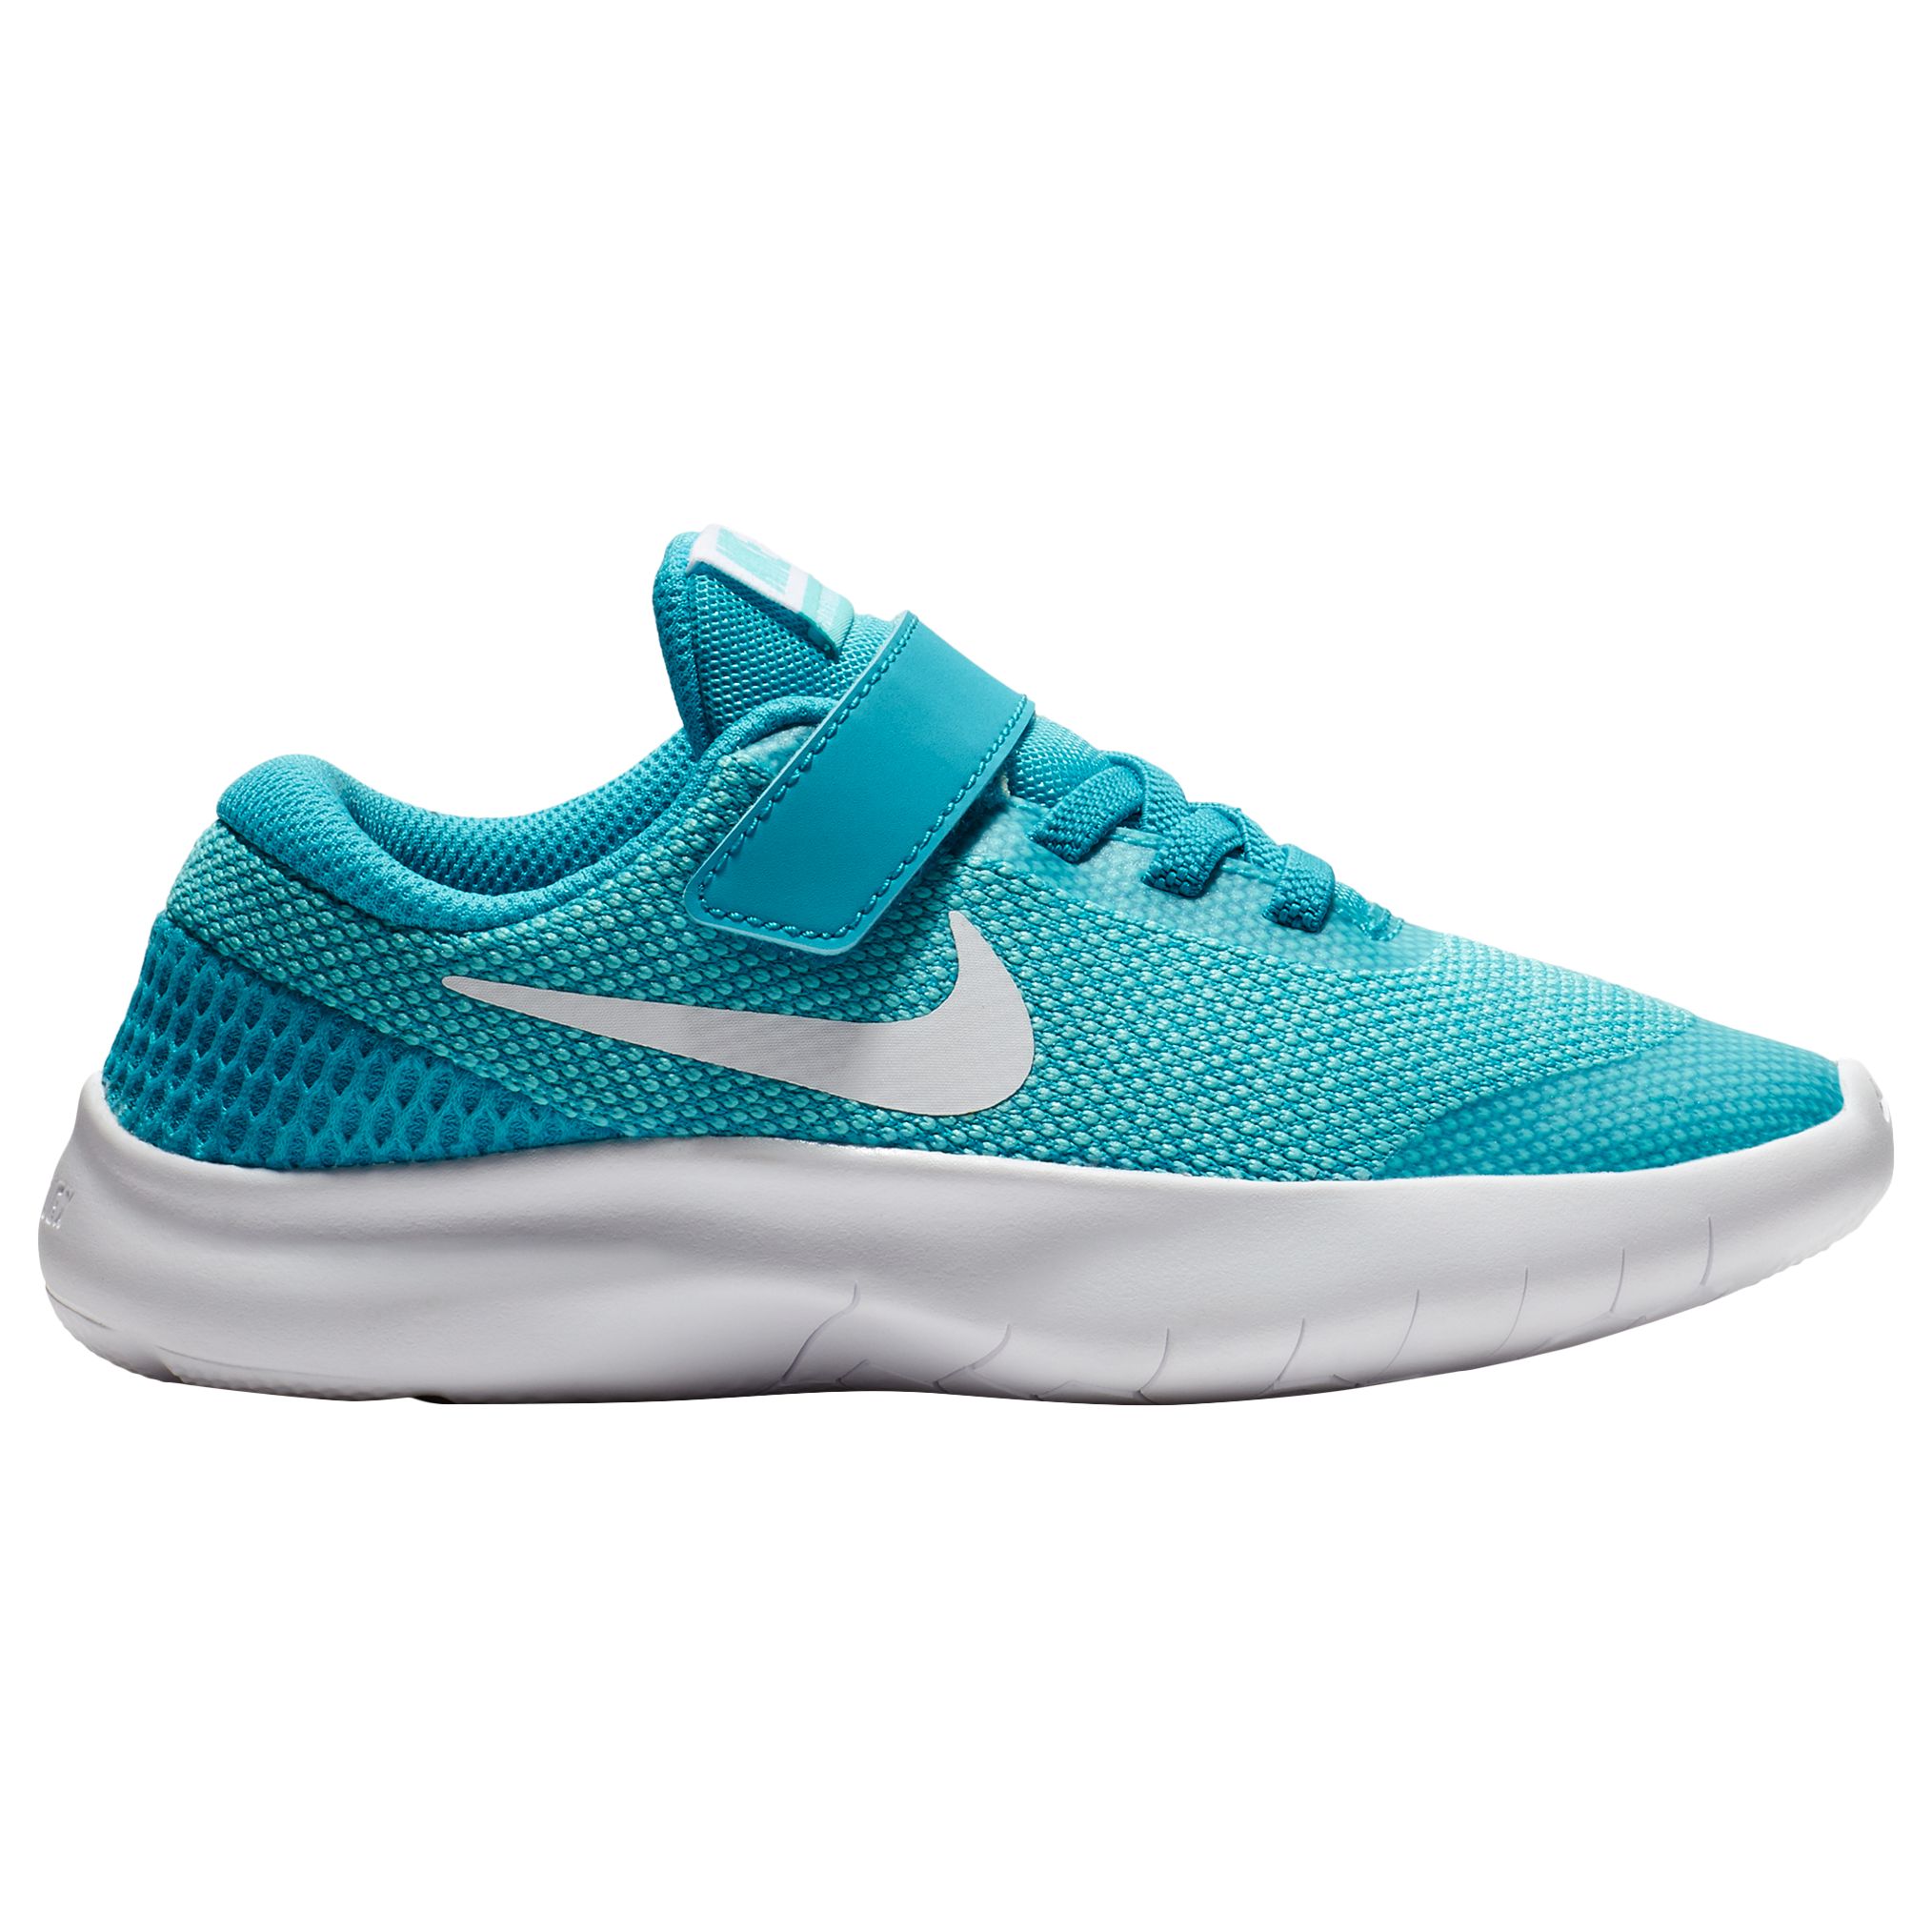 Nike Children's Flex Experience Run 7 PS Trainers, Turquoise, 12 Jnr